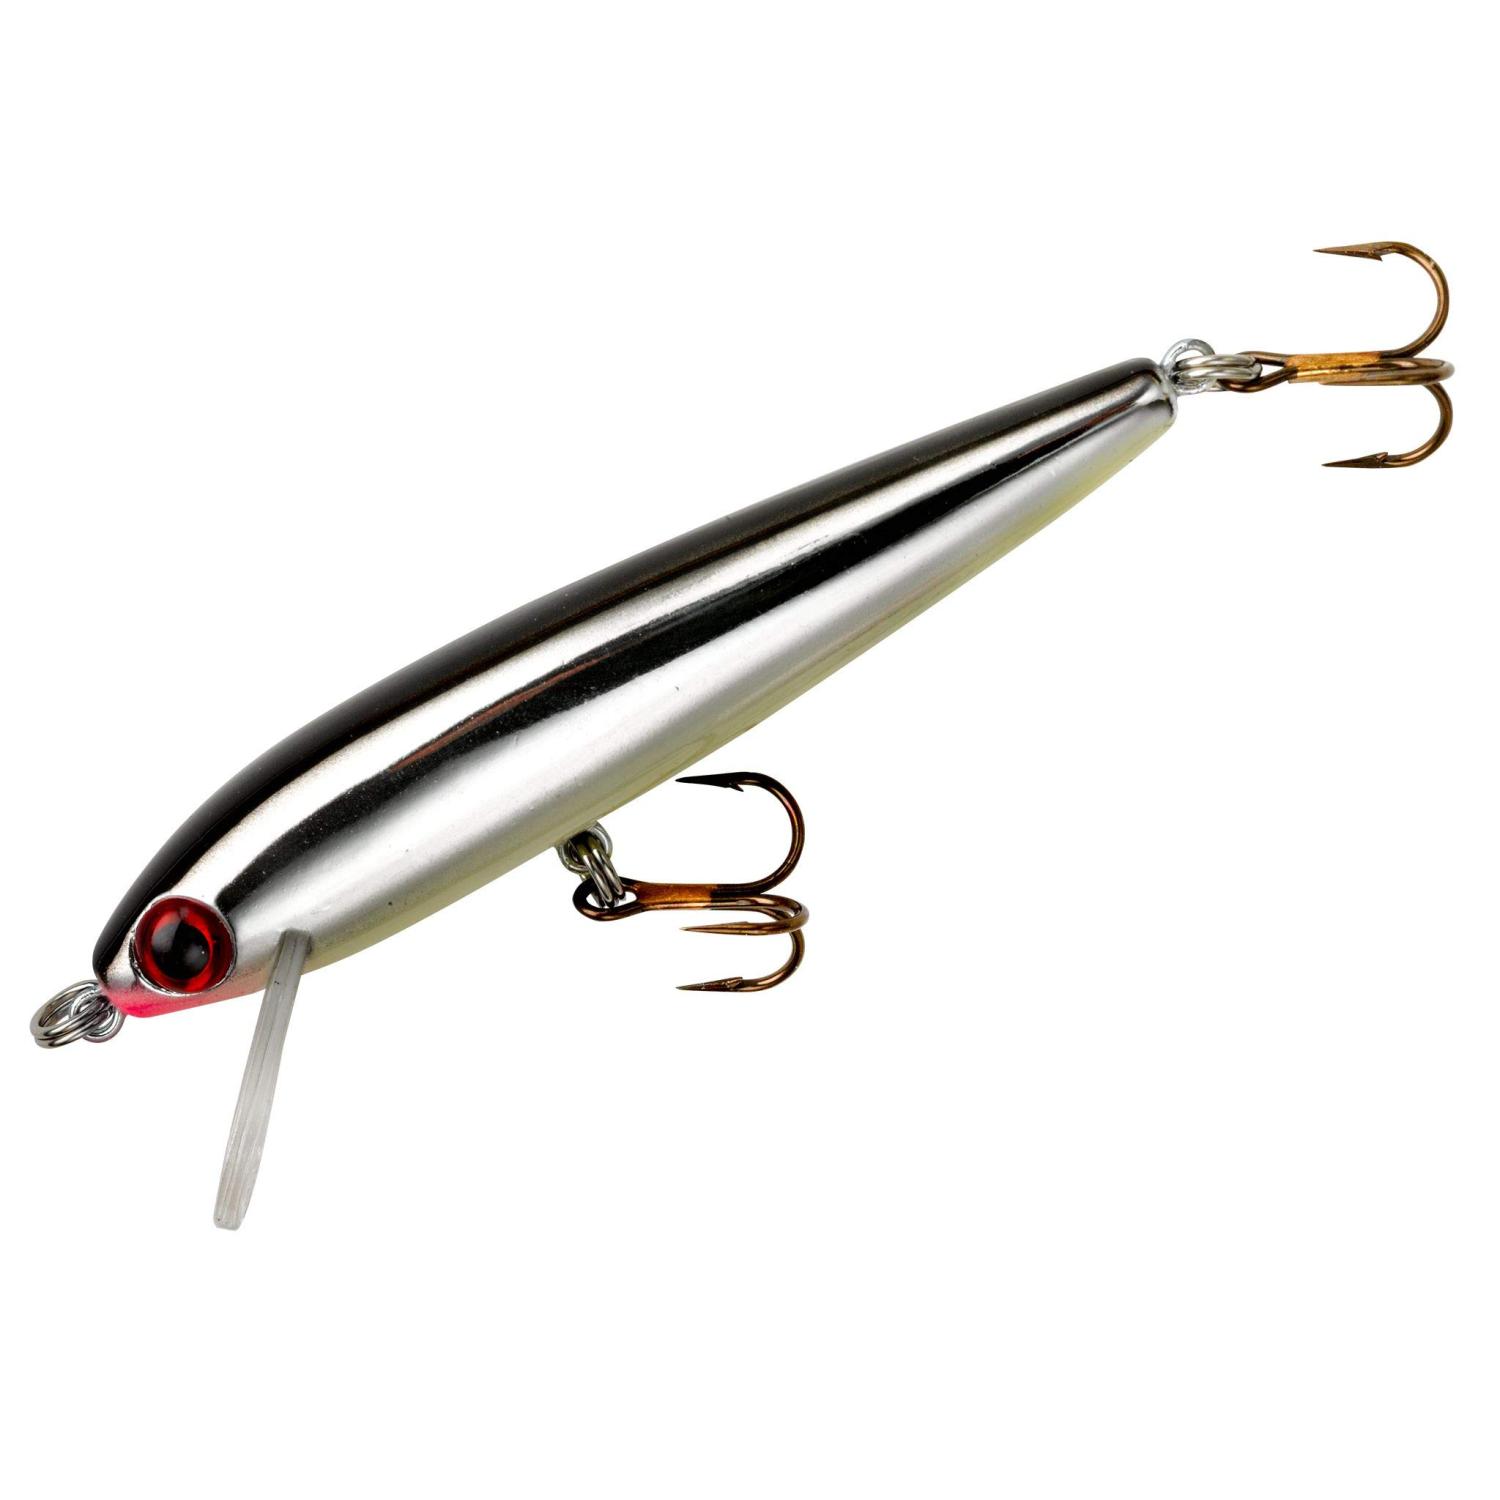 Rebel Lures Value Series Minnow Crankbait Shallow Water Fishing